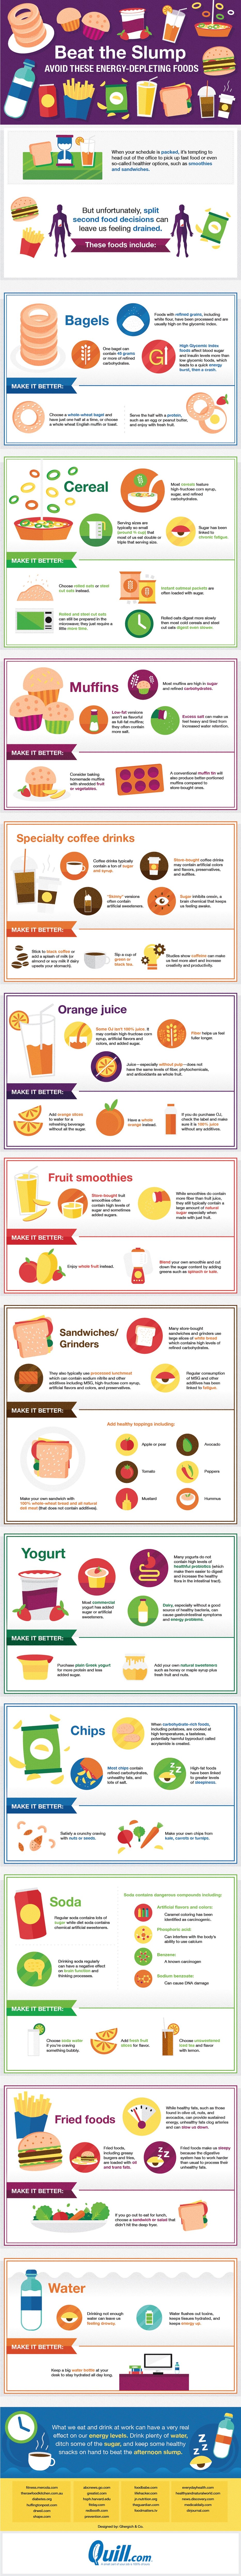 Be Careful: These Popular Snacks Can Be Surprisingly Energy-Depleting Infographic